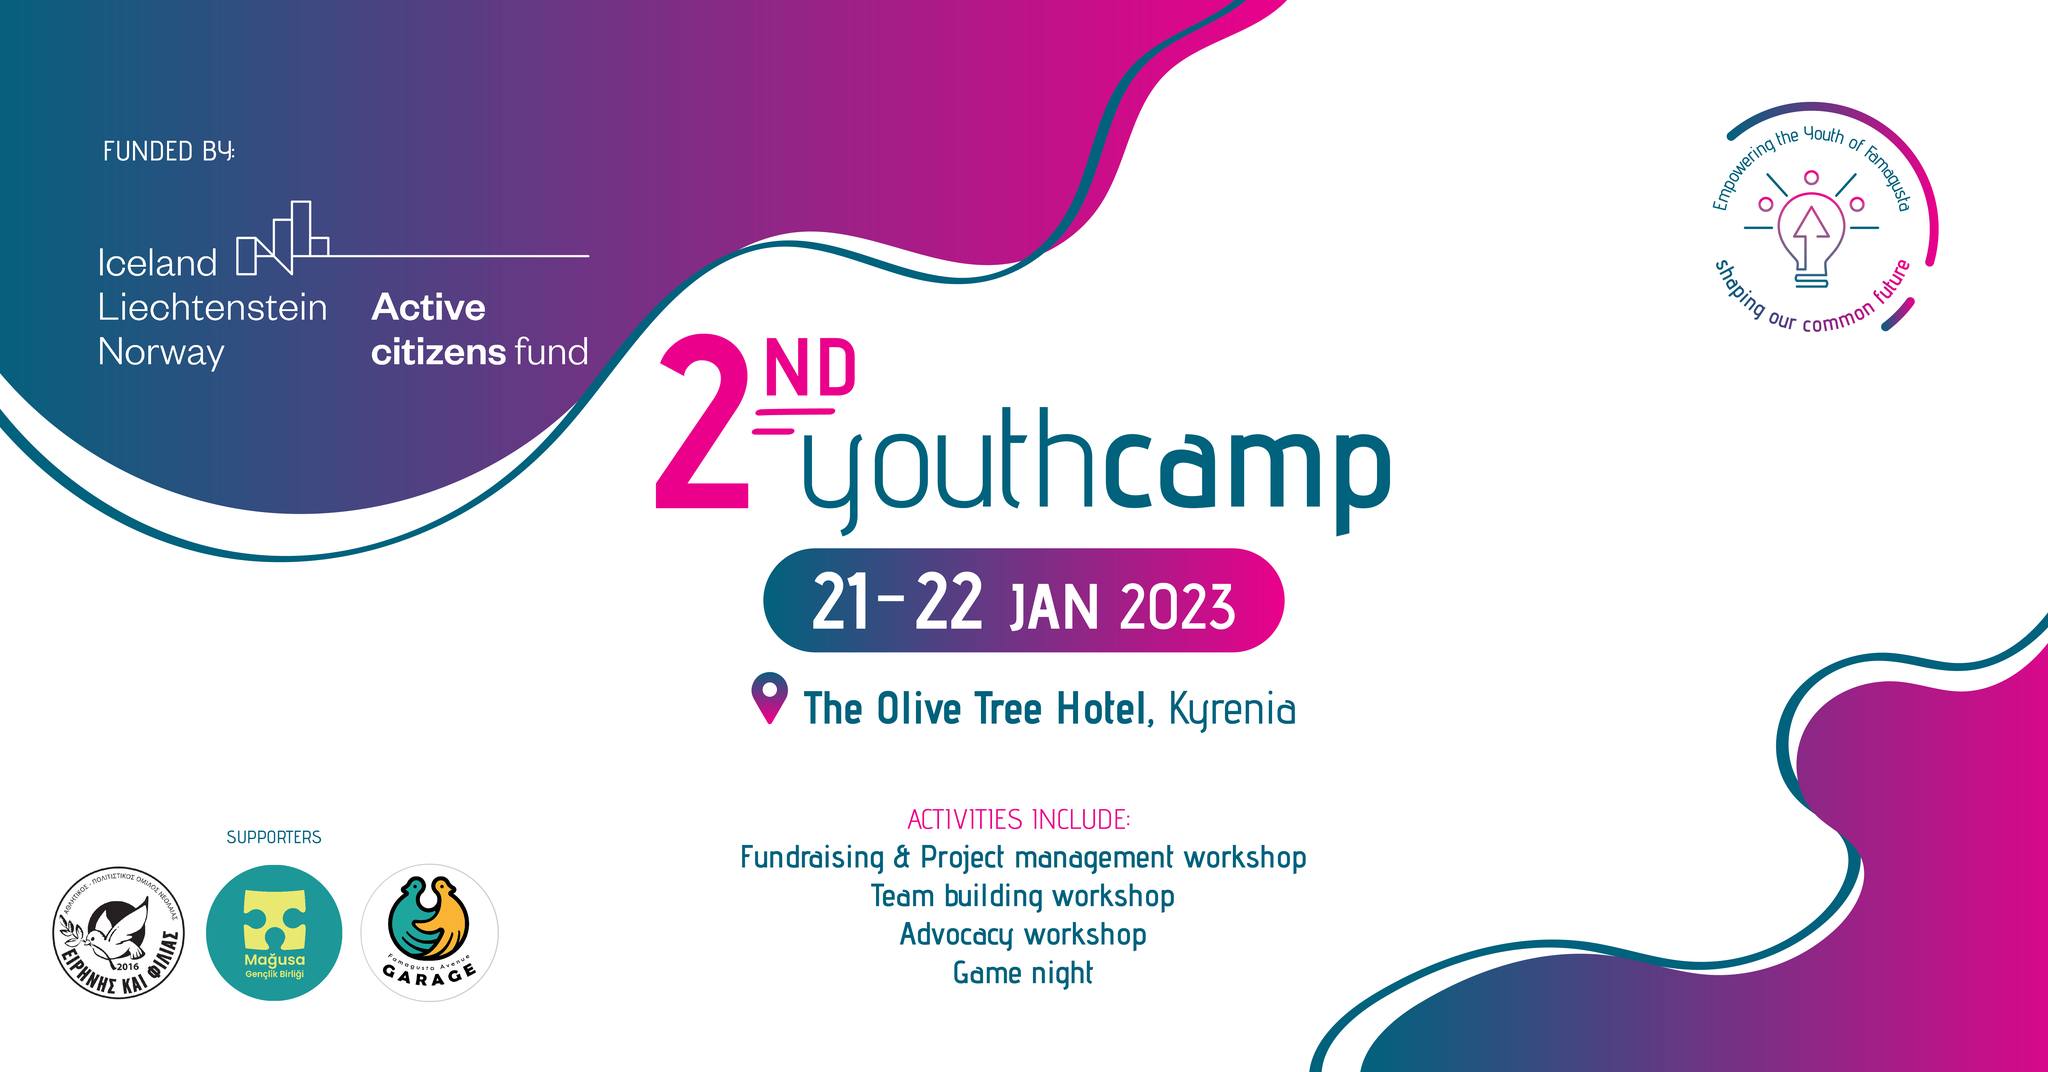 2nd Youth Camp